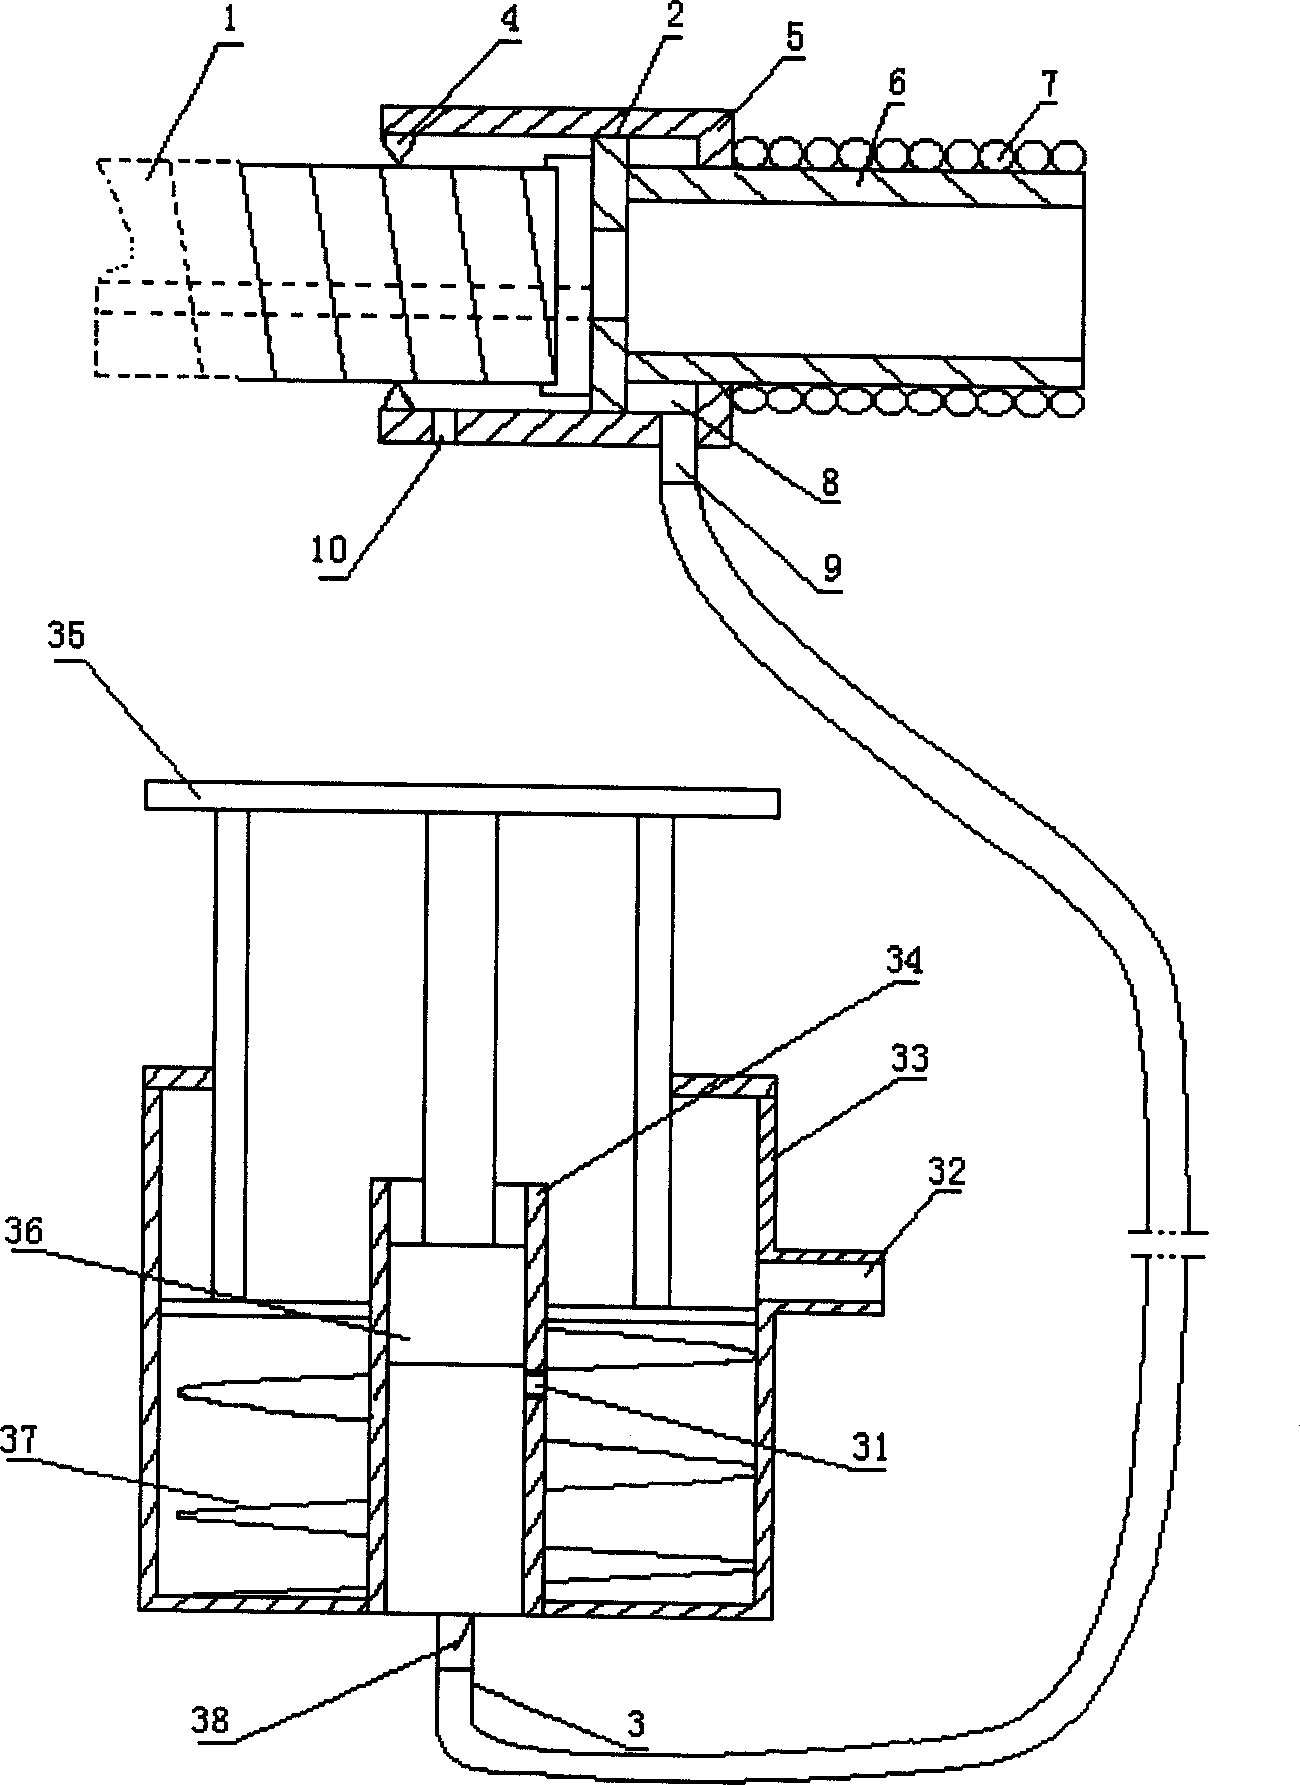 Multi-ring looping and binding device for treating human esophagus and stomach fundus varicosity